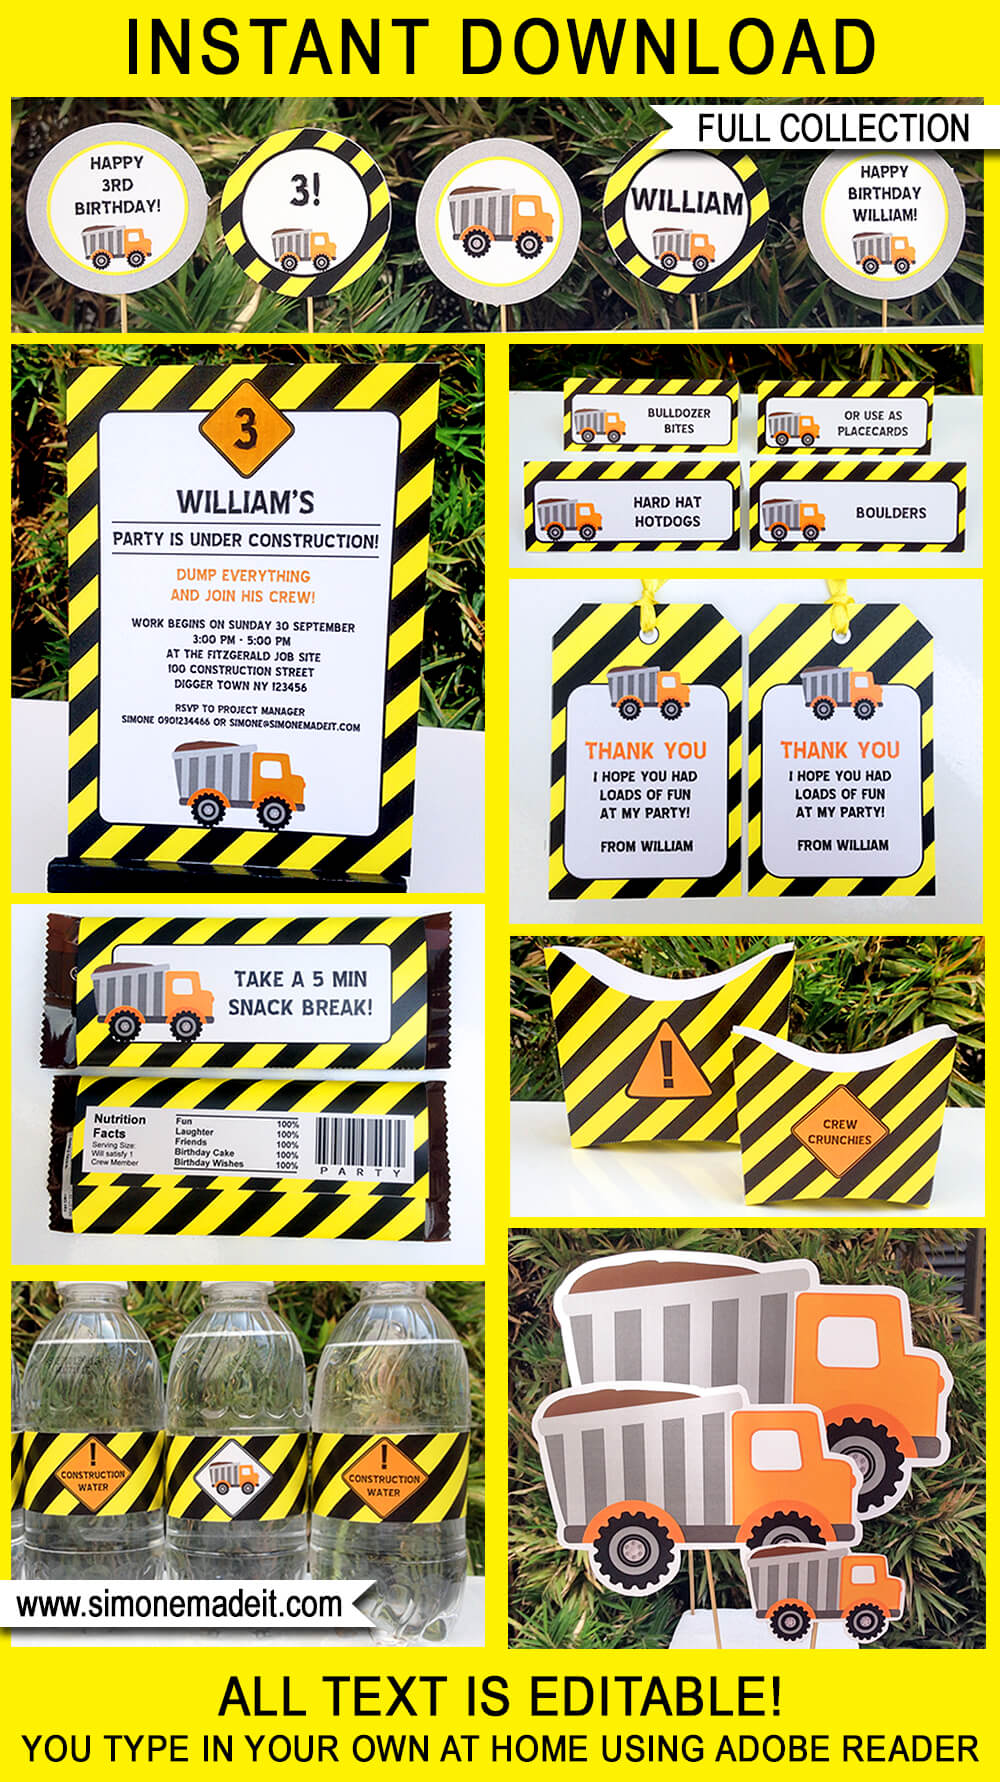 Construction Party Printables, Invitations & Decorations | Birthday Party | Editable Theme Templates | Printable Road Signs | INSTANT DOWNLOAD $12.50 via SIMONEmadeit.com